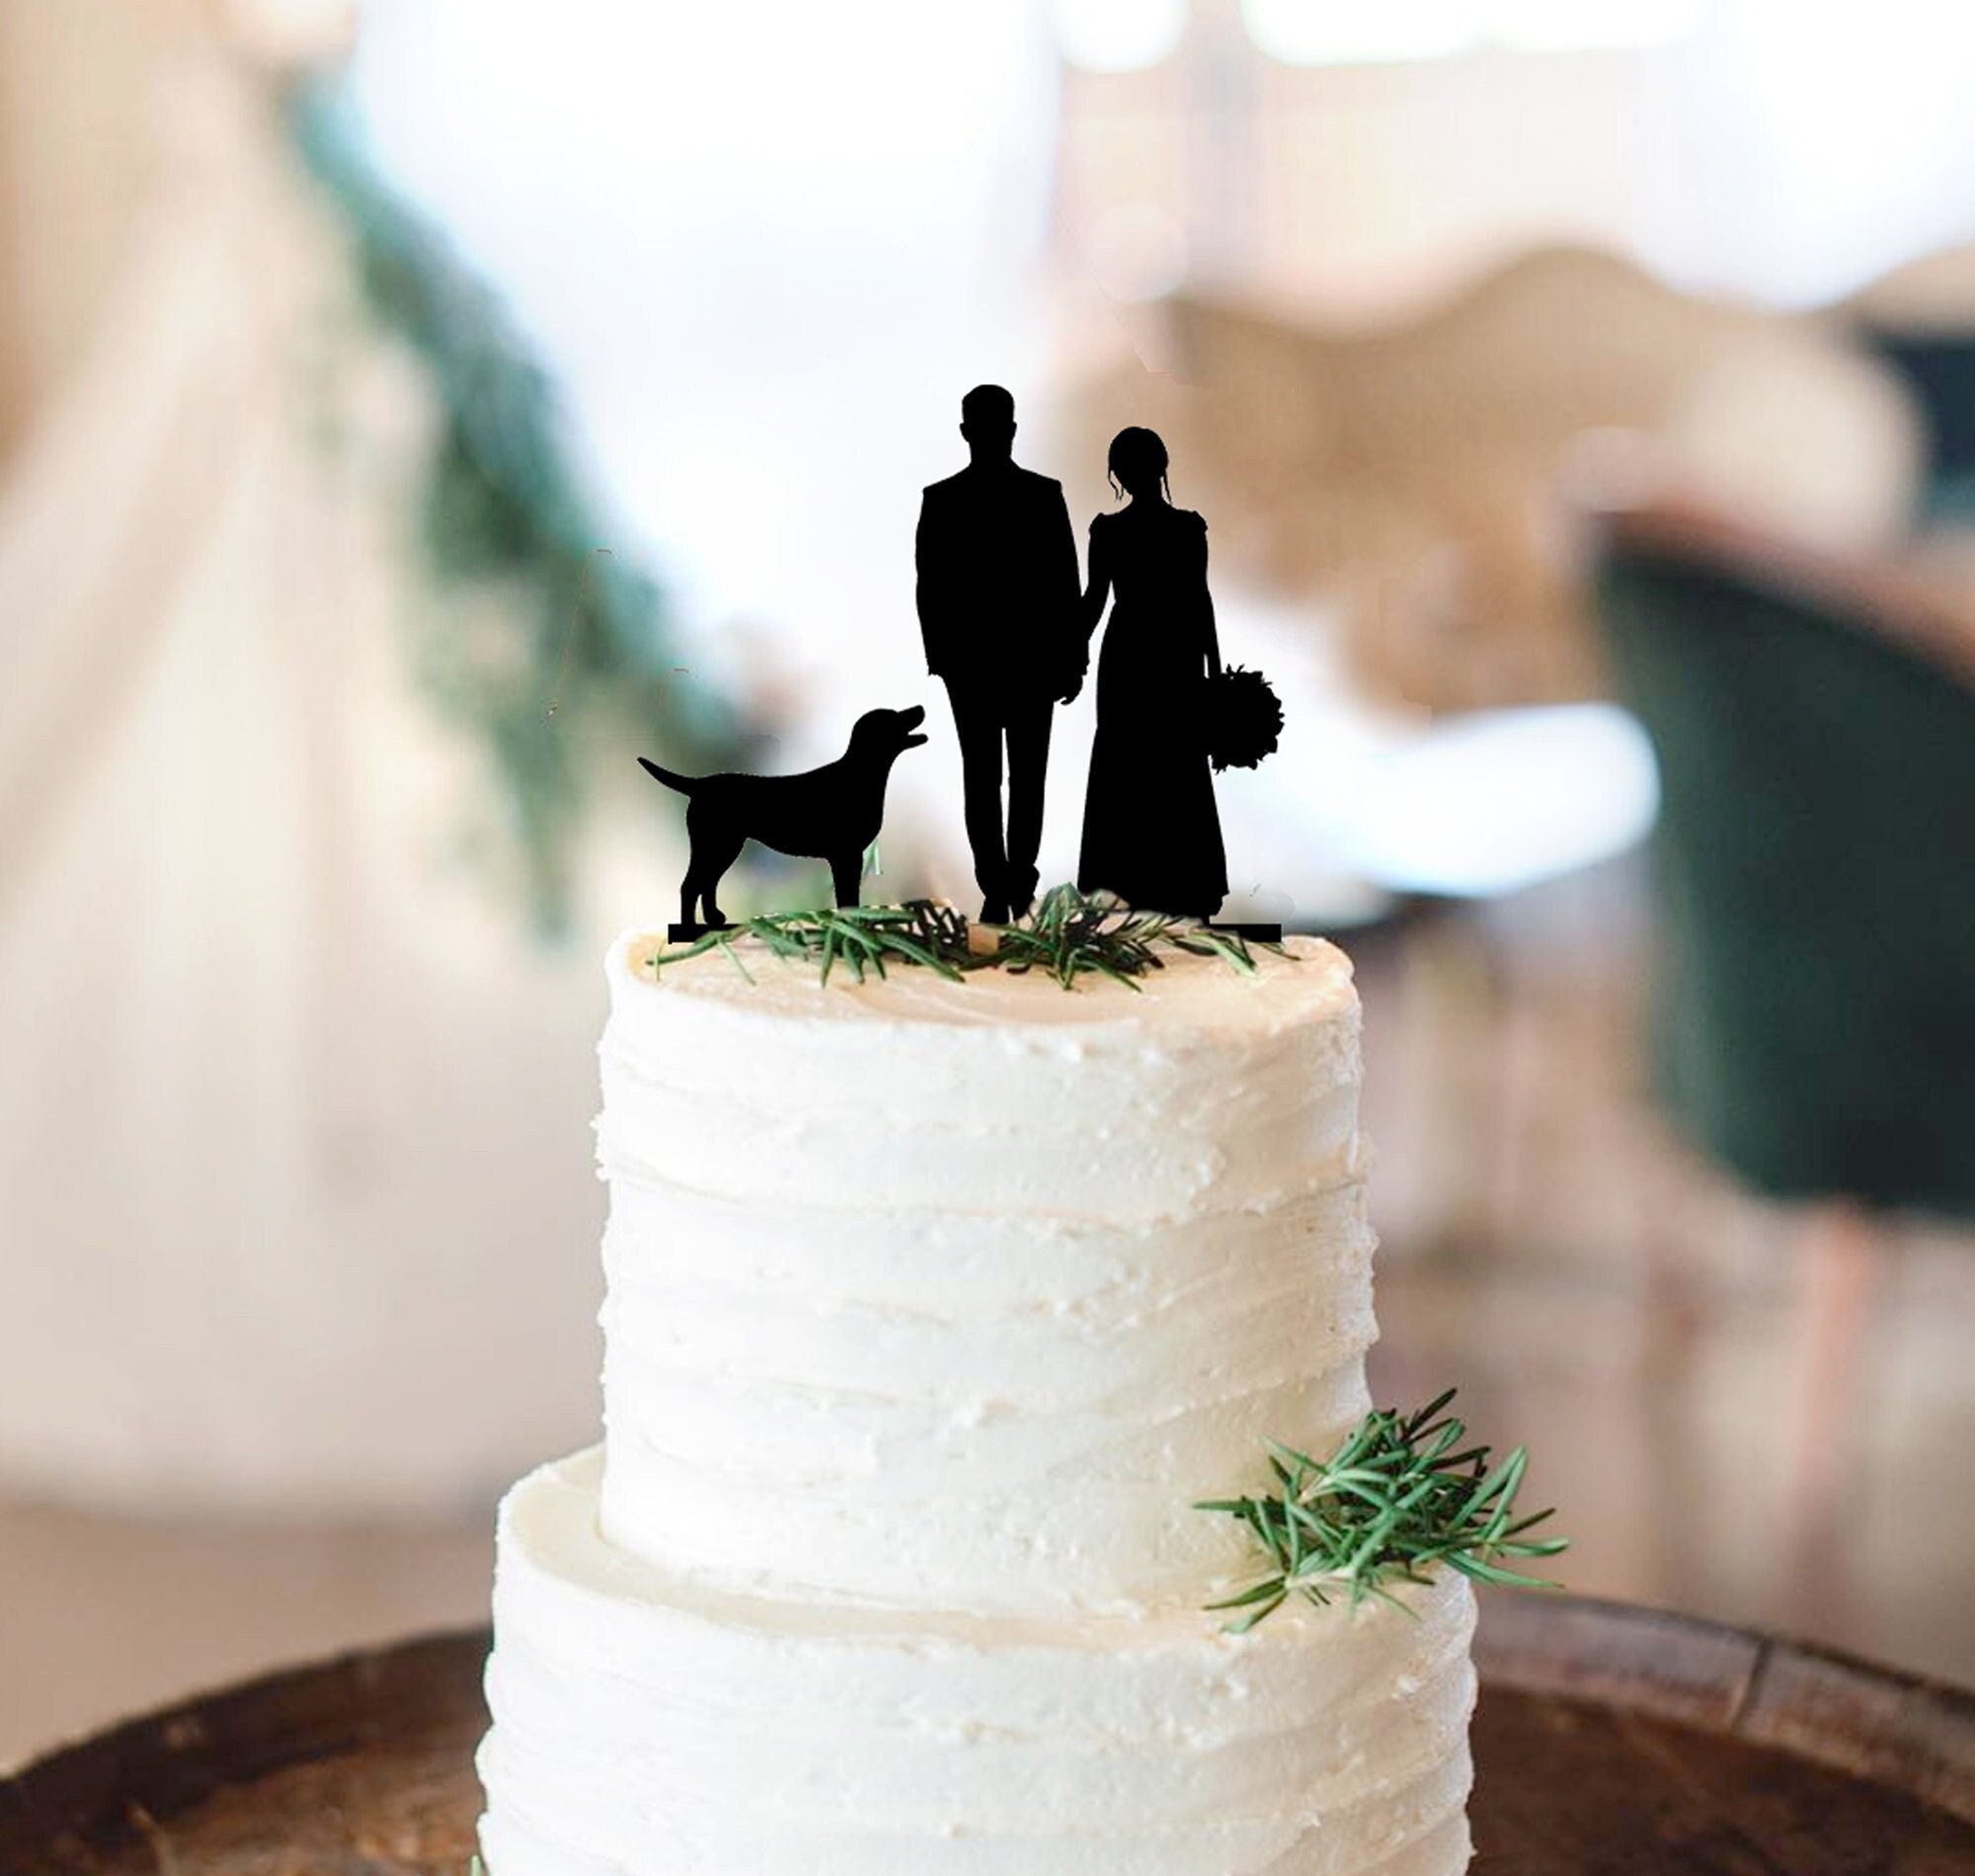 Irish Red Setter Cake Topper with Dogs; Animals; Puppy Bride and Groom Dog Cake Toppers Wedding Cake Topper Wedding Cake Toppers